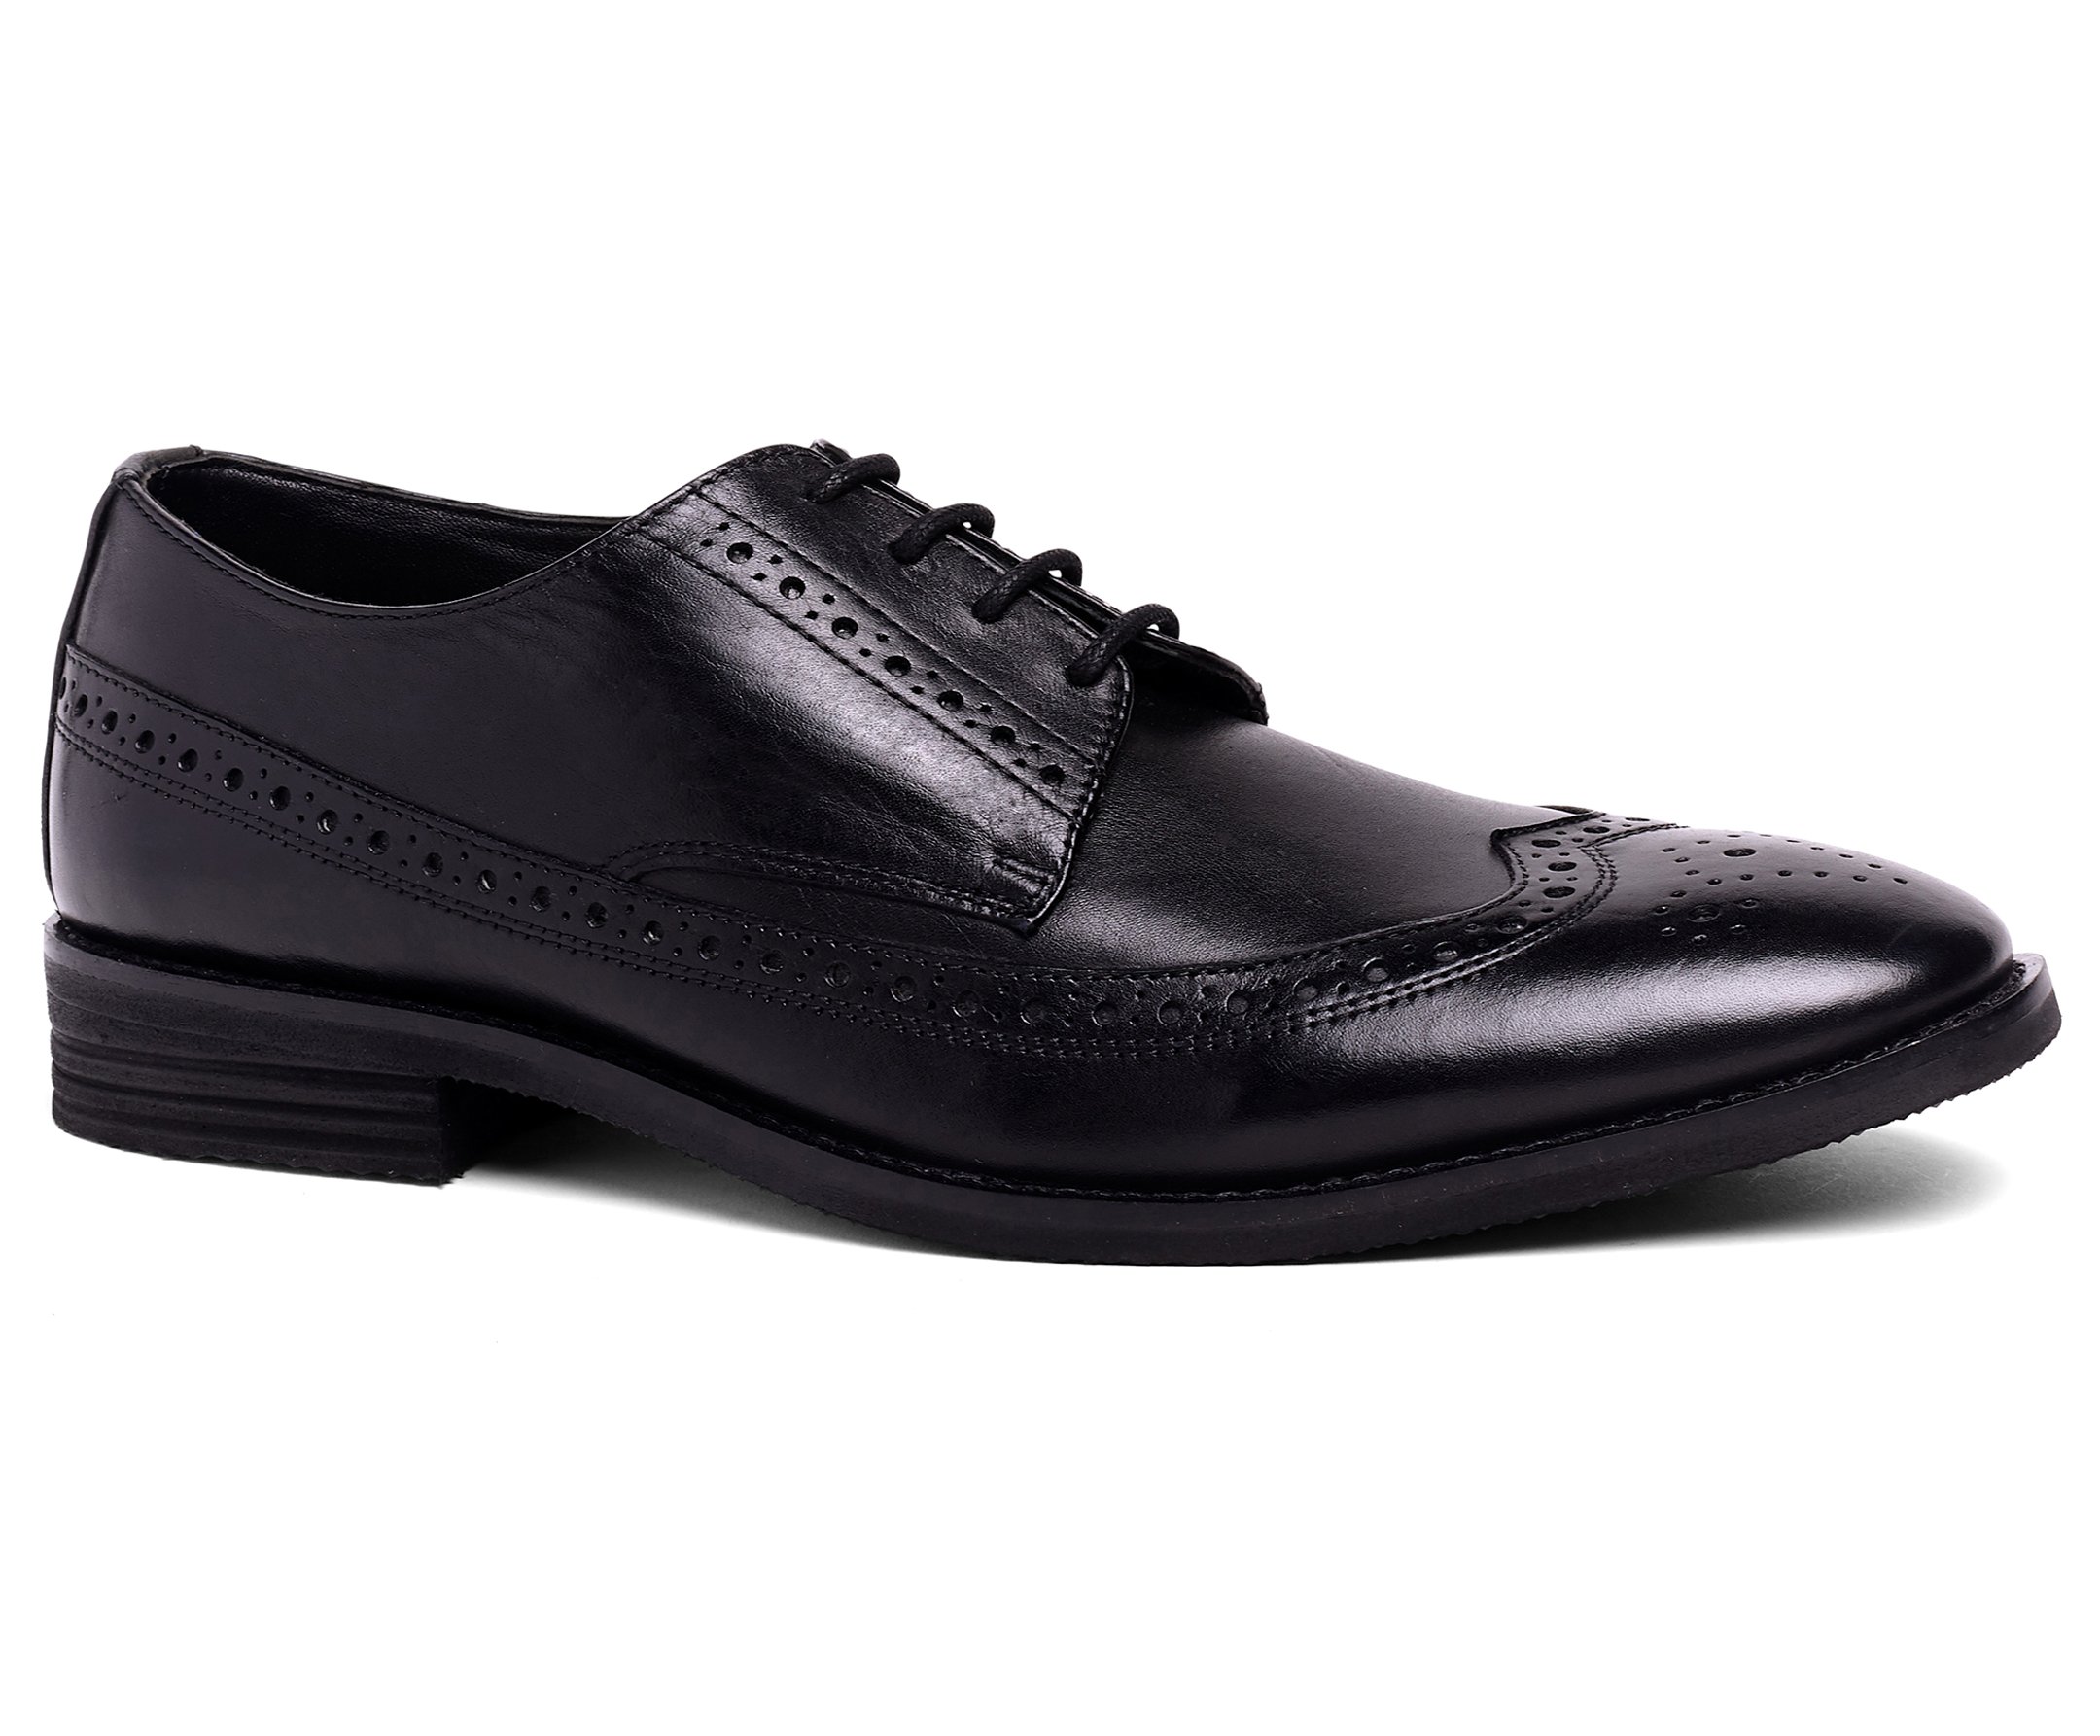 Paolo Bove Florenza Men's Wingtip Oxford - image 1 of 5